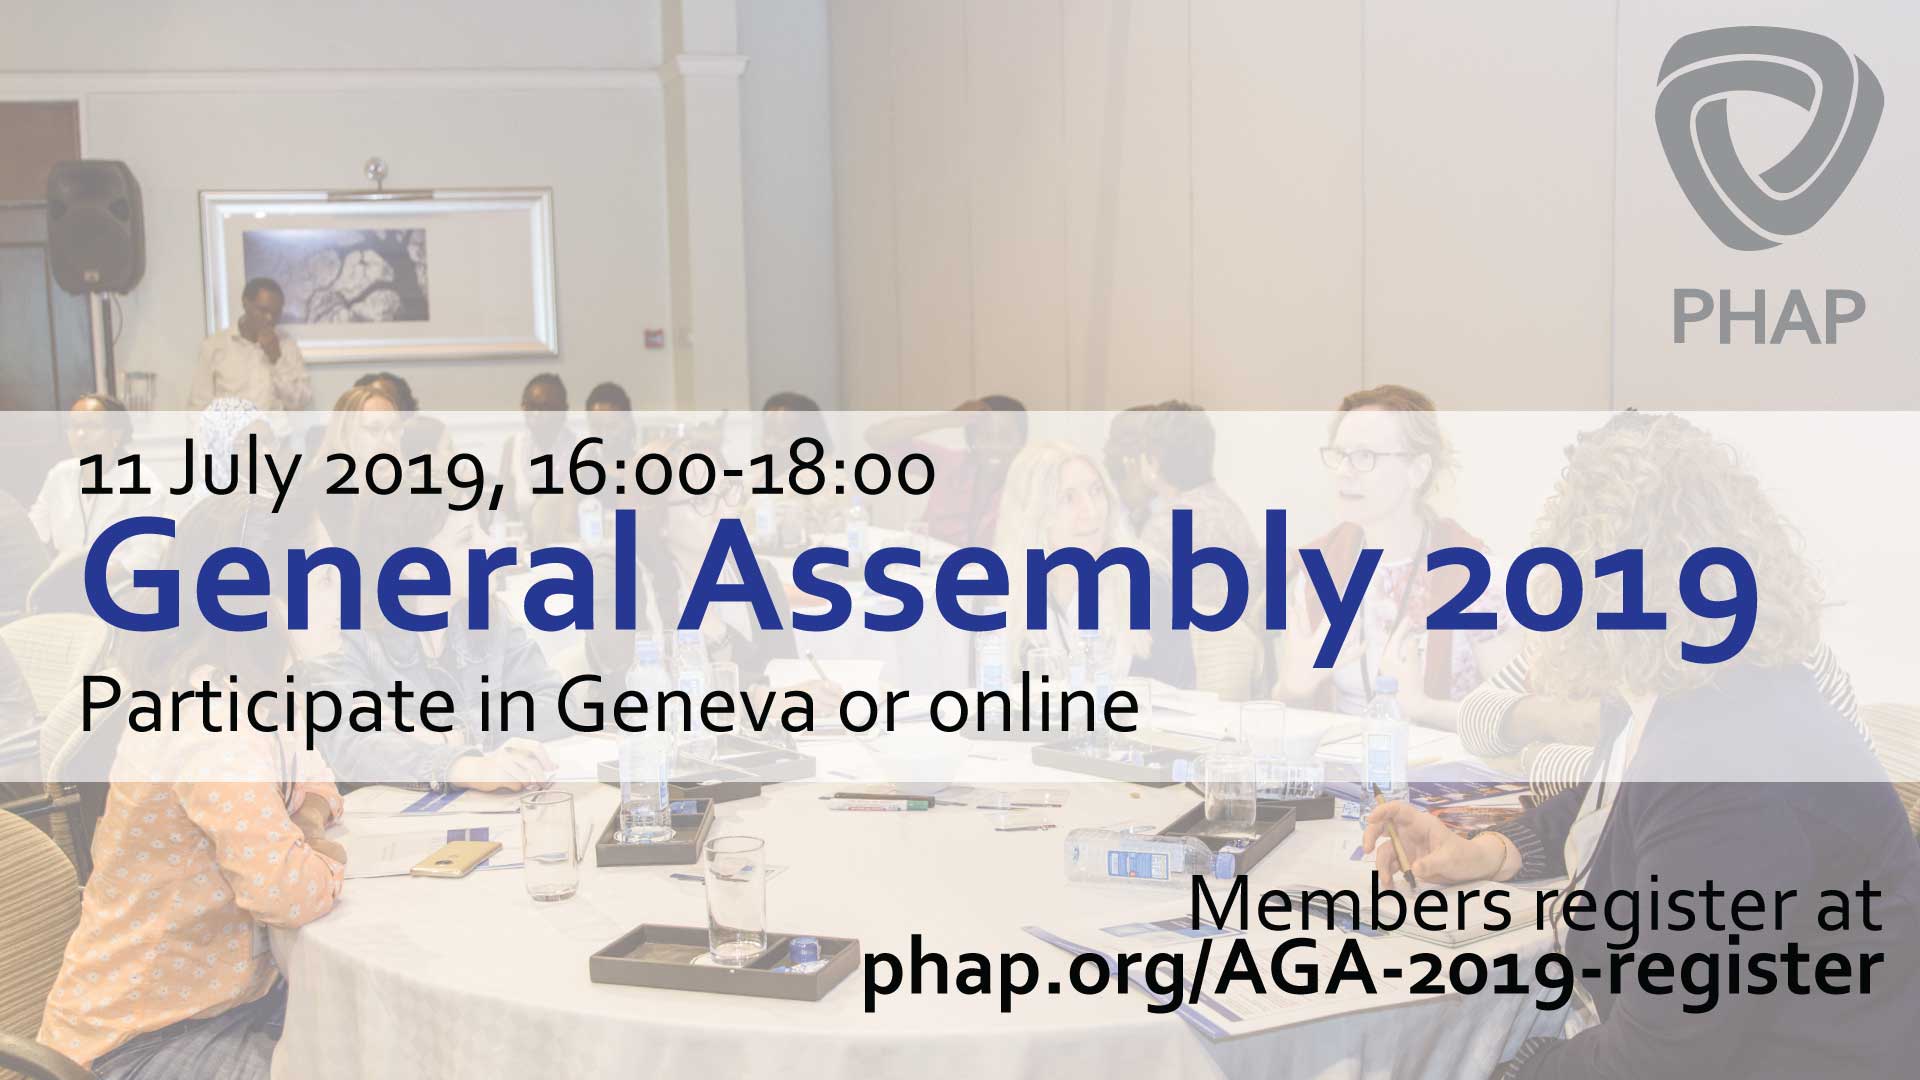 PHAP Annual General Assembly 2019